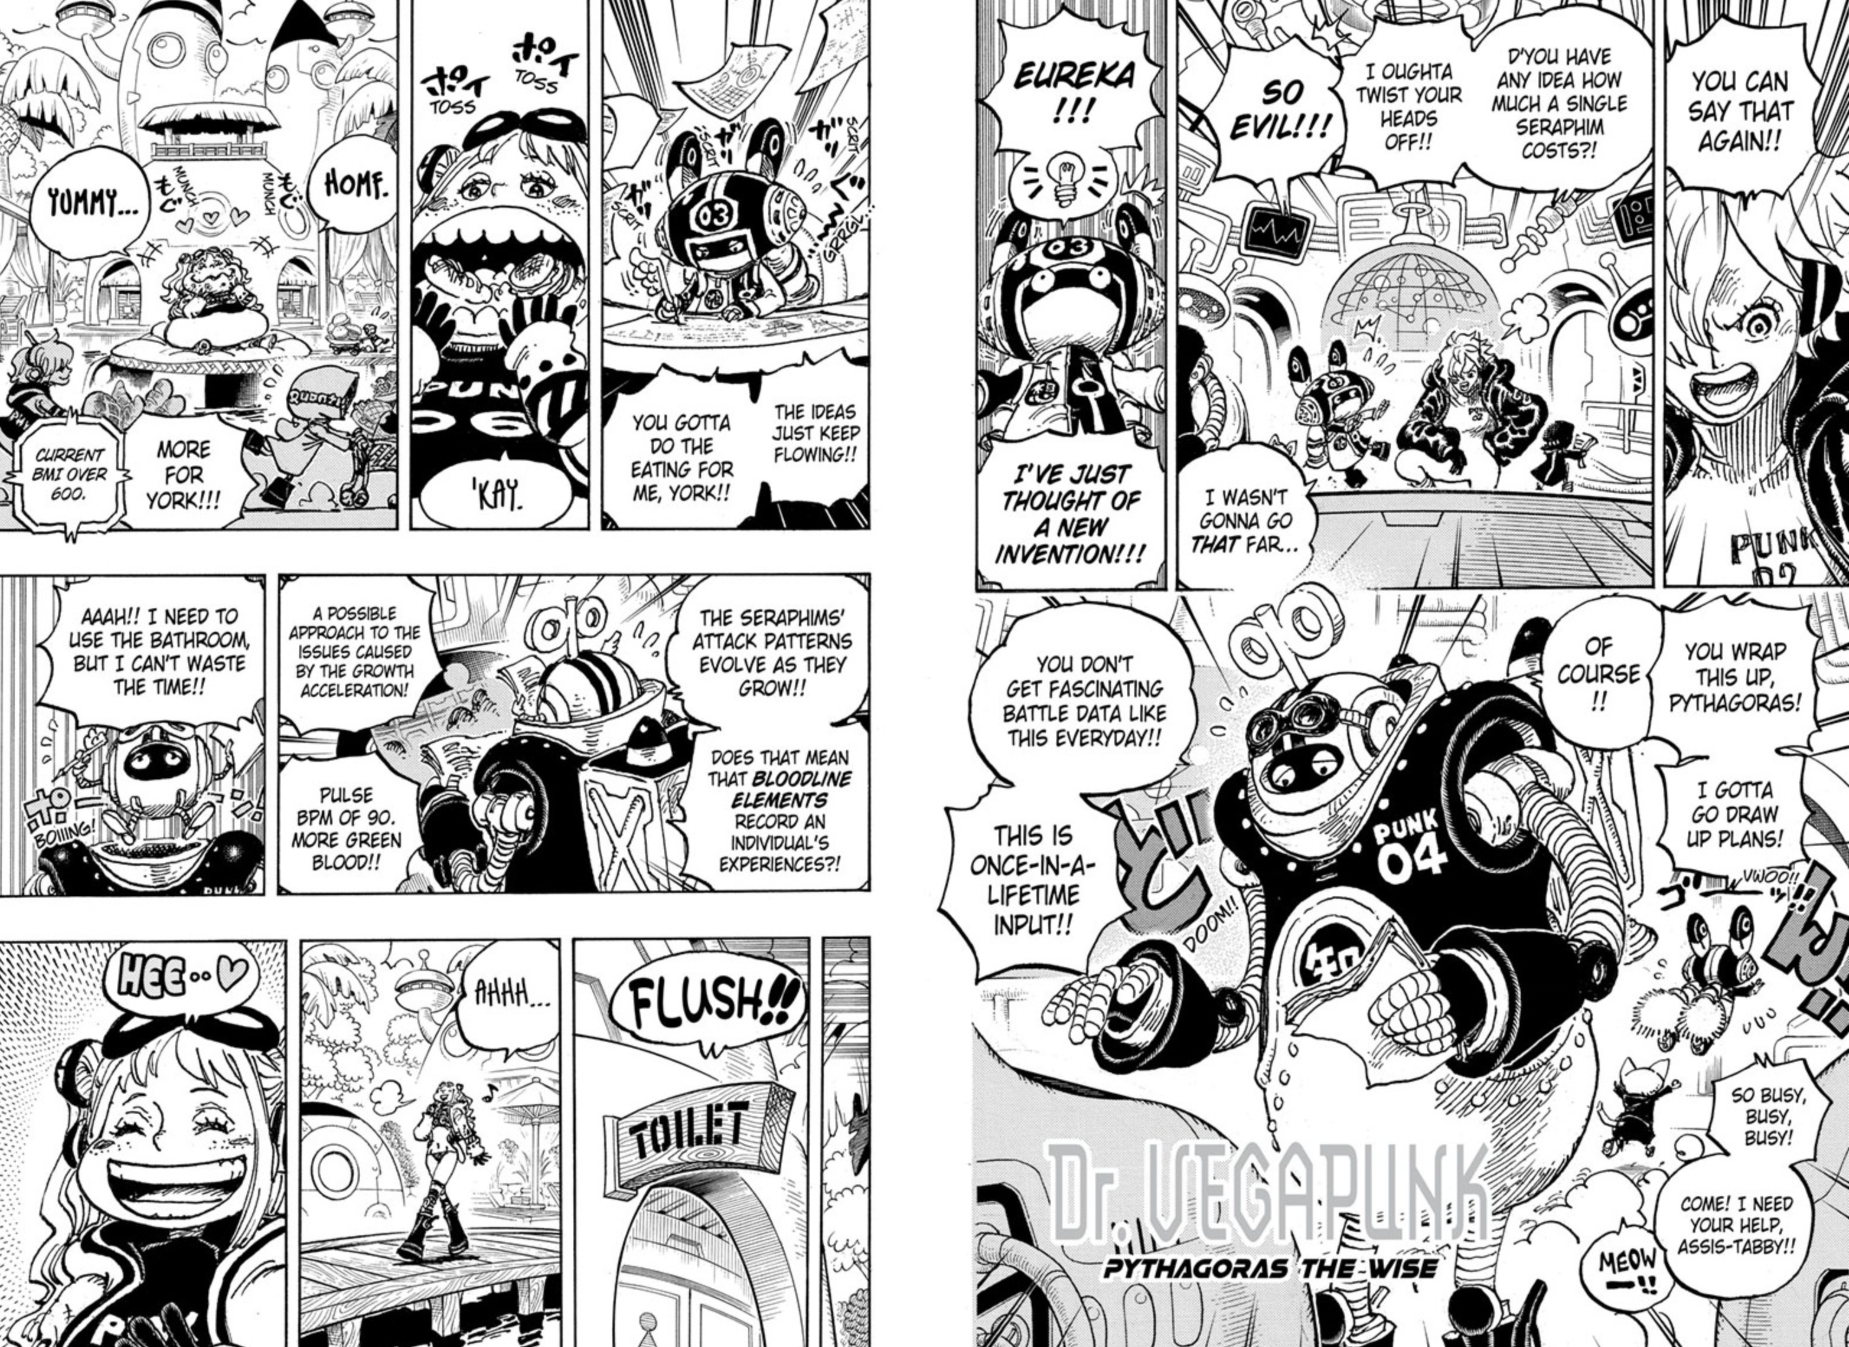 One Piece Chapter 1065 Pages 14-15